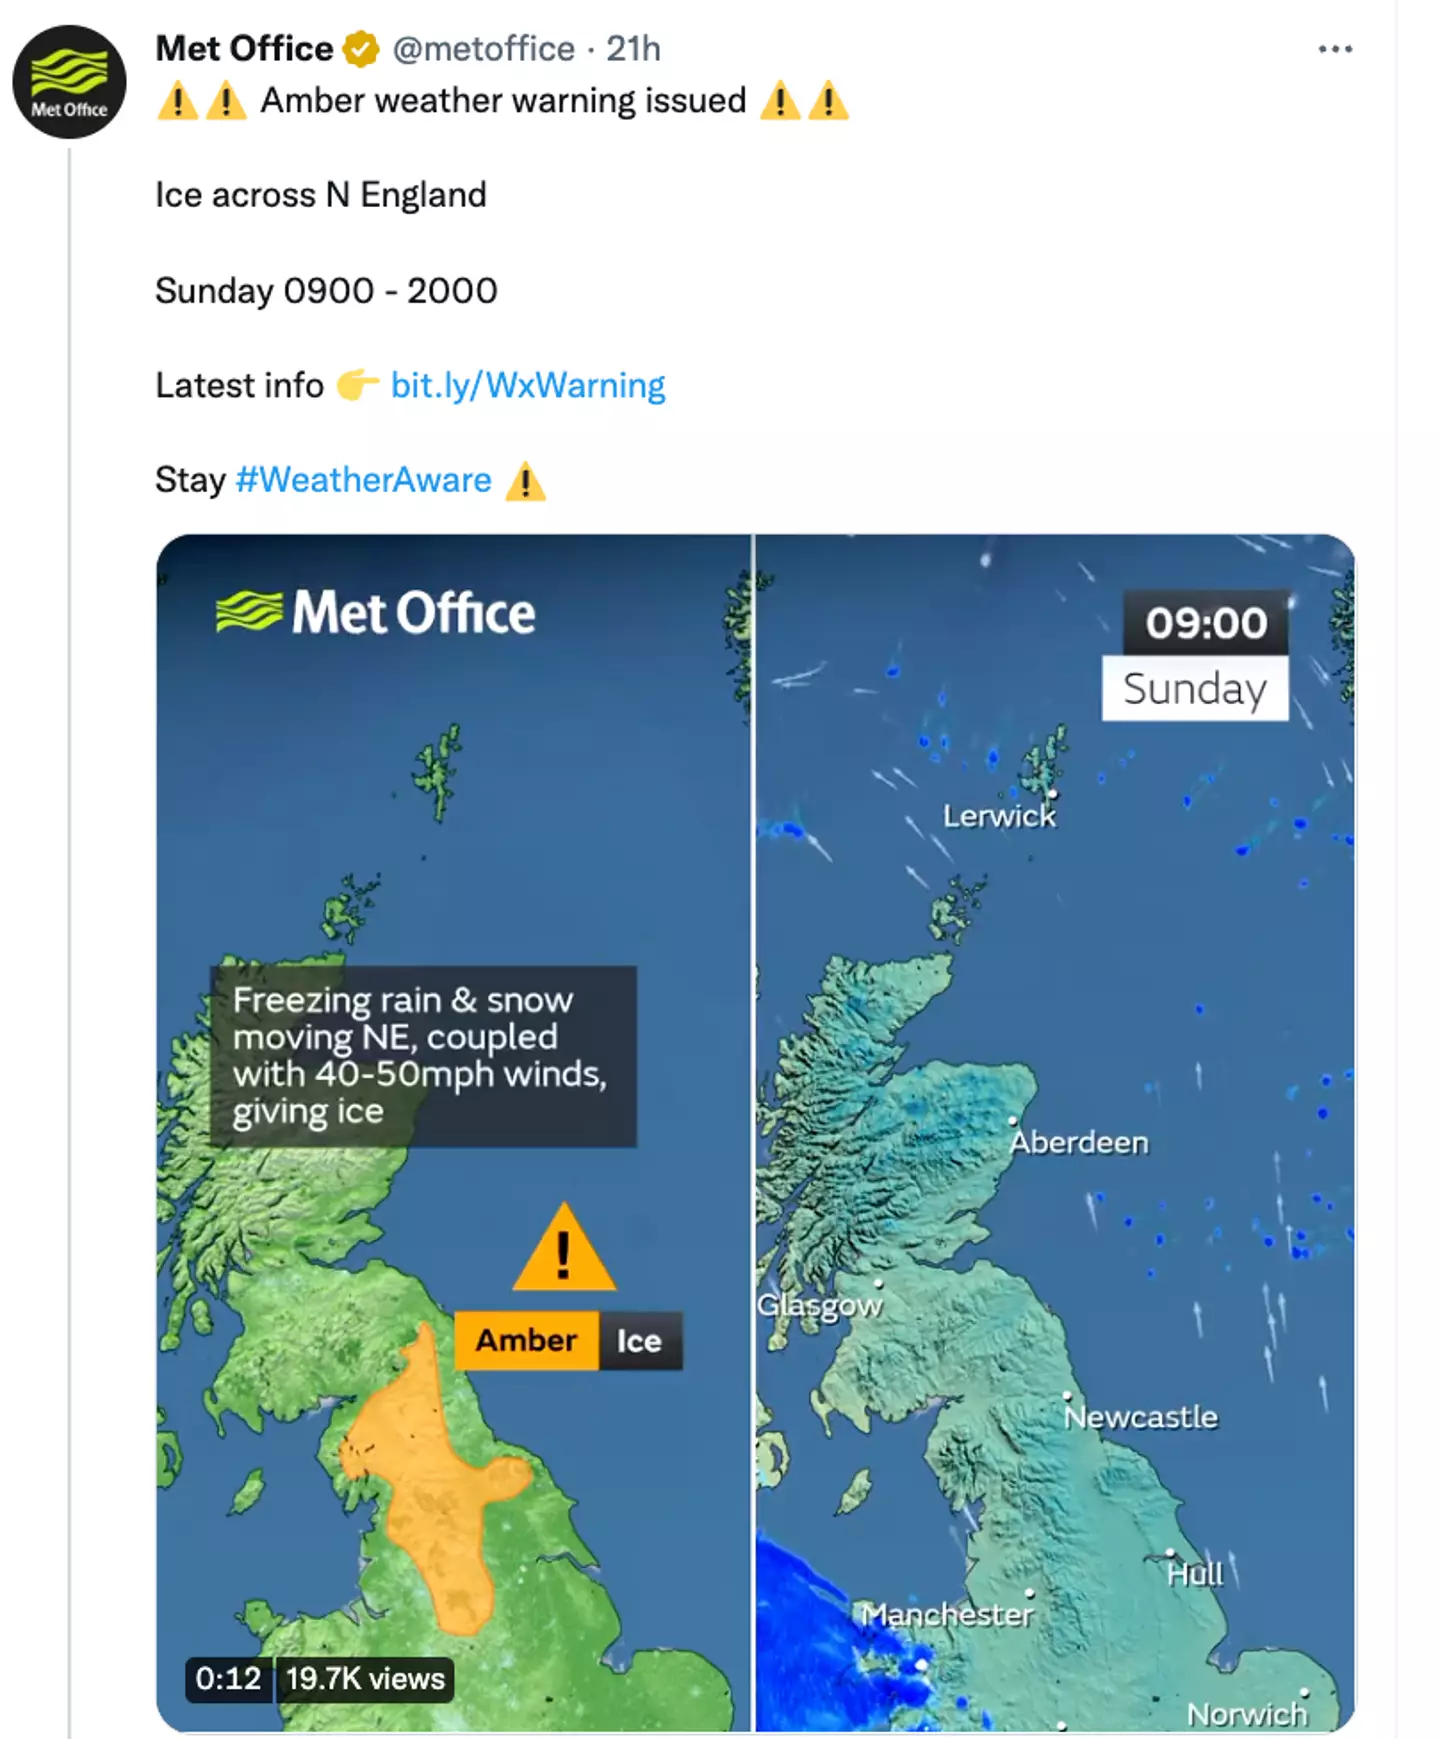 The Met Office have issued an amber weather warning for the north of England.